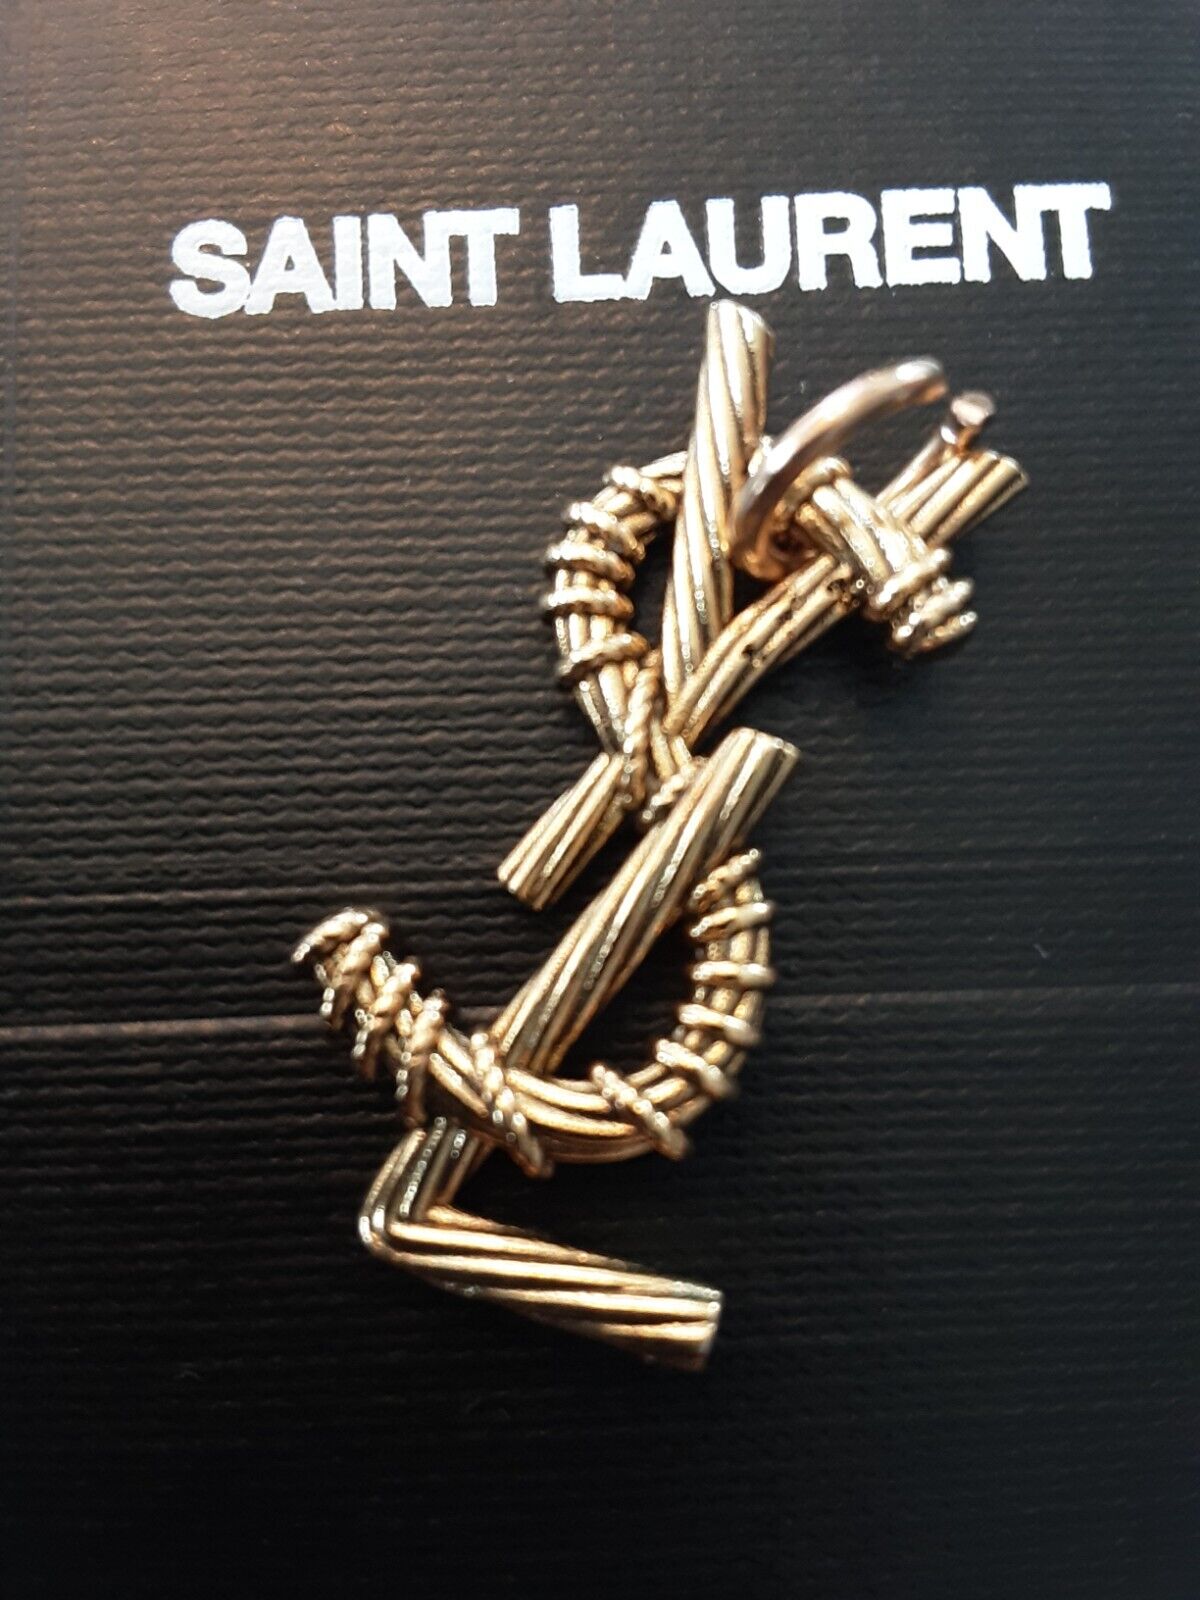 One  YSL  1 pieces   metal zipper pull  pendant ligth bronze